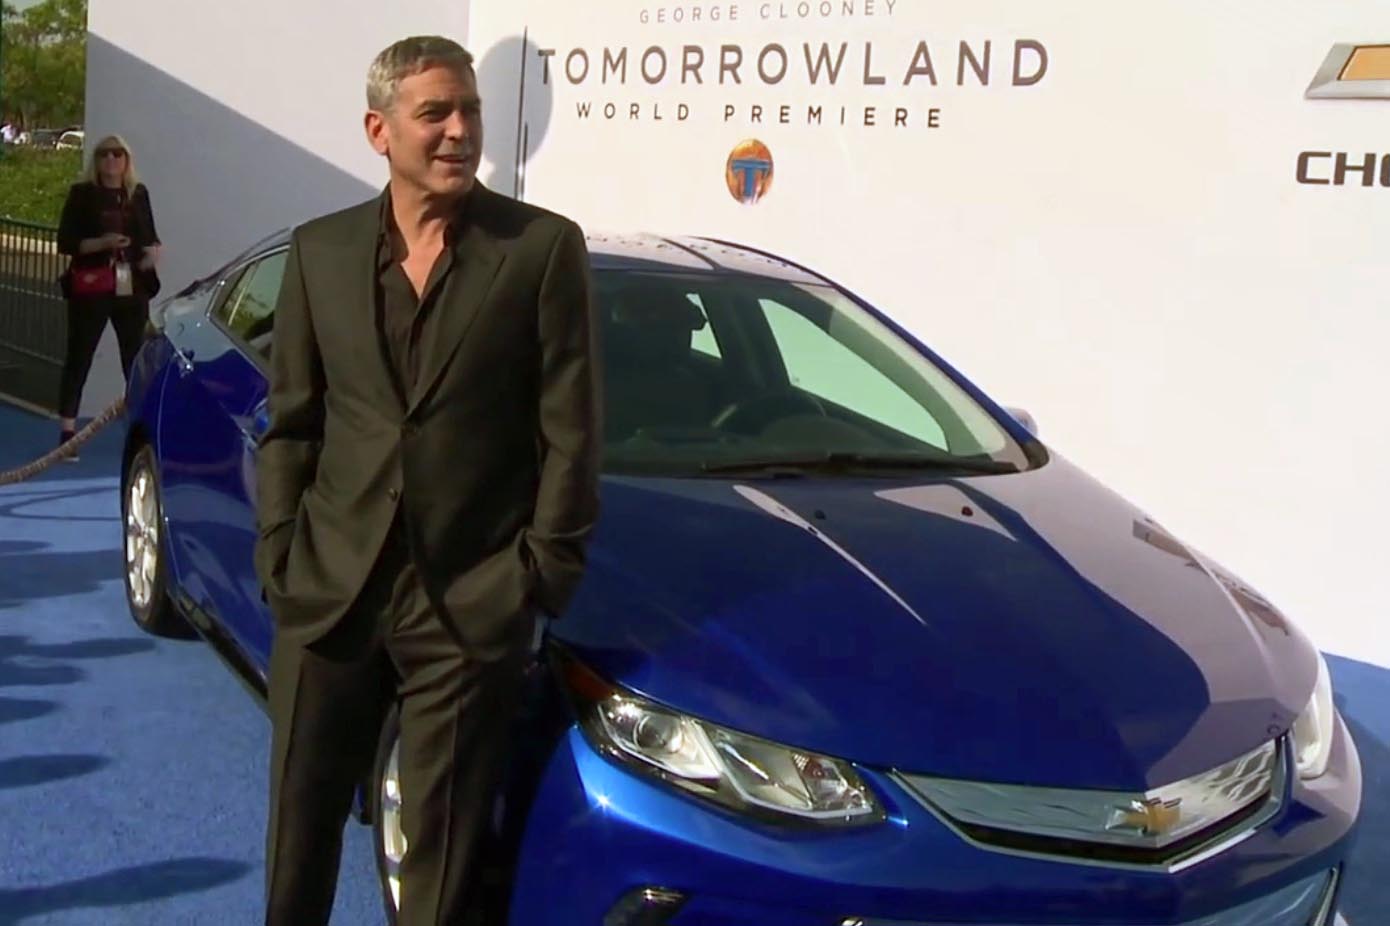 For 2016 Chevrolet overhauled their electric vehicle and struck a deal with Disney. Even prior to the car's availability at dealerships, it appears in George Clooney's sci-fi/fantasy epic <i>Tomorrowland</i>. The movie's theme about an optimistic future fits perfectly with the message Chevy wishes to convey with its flagship green model.